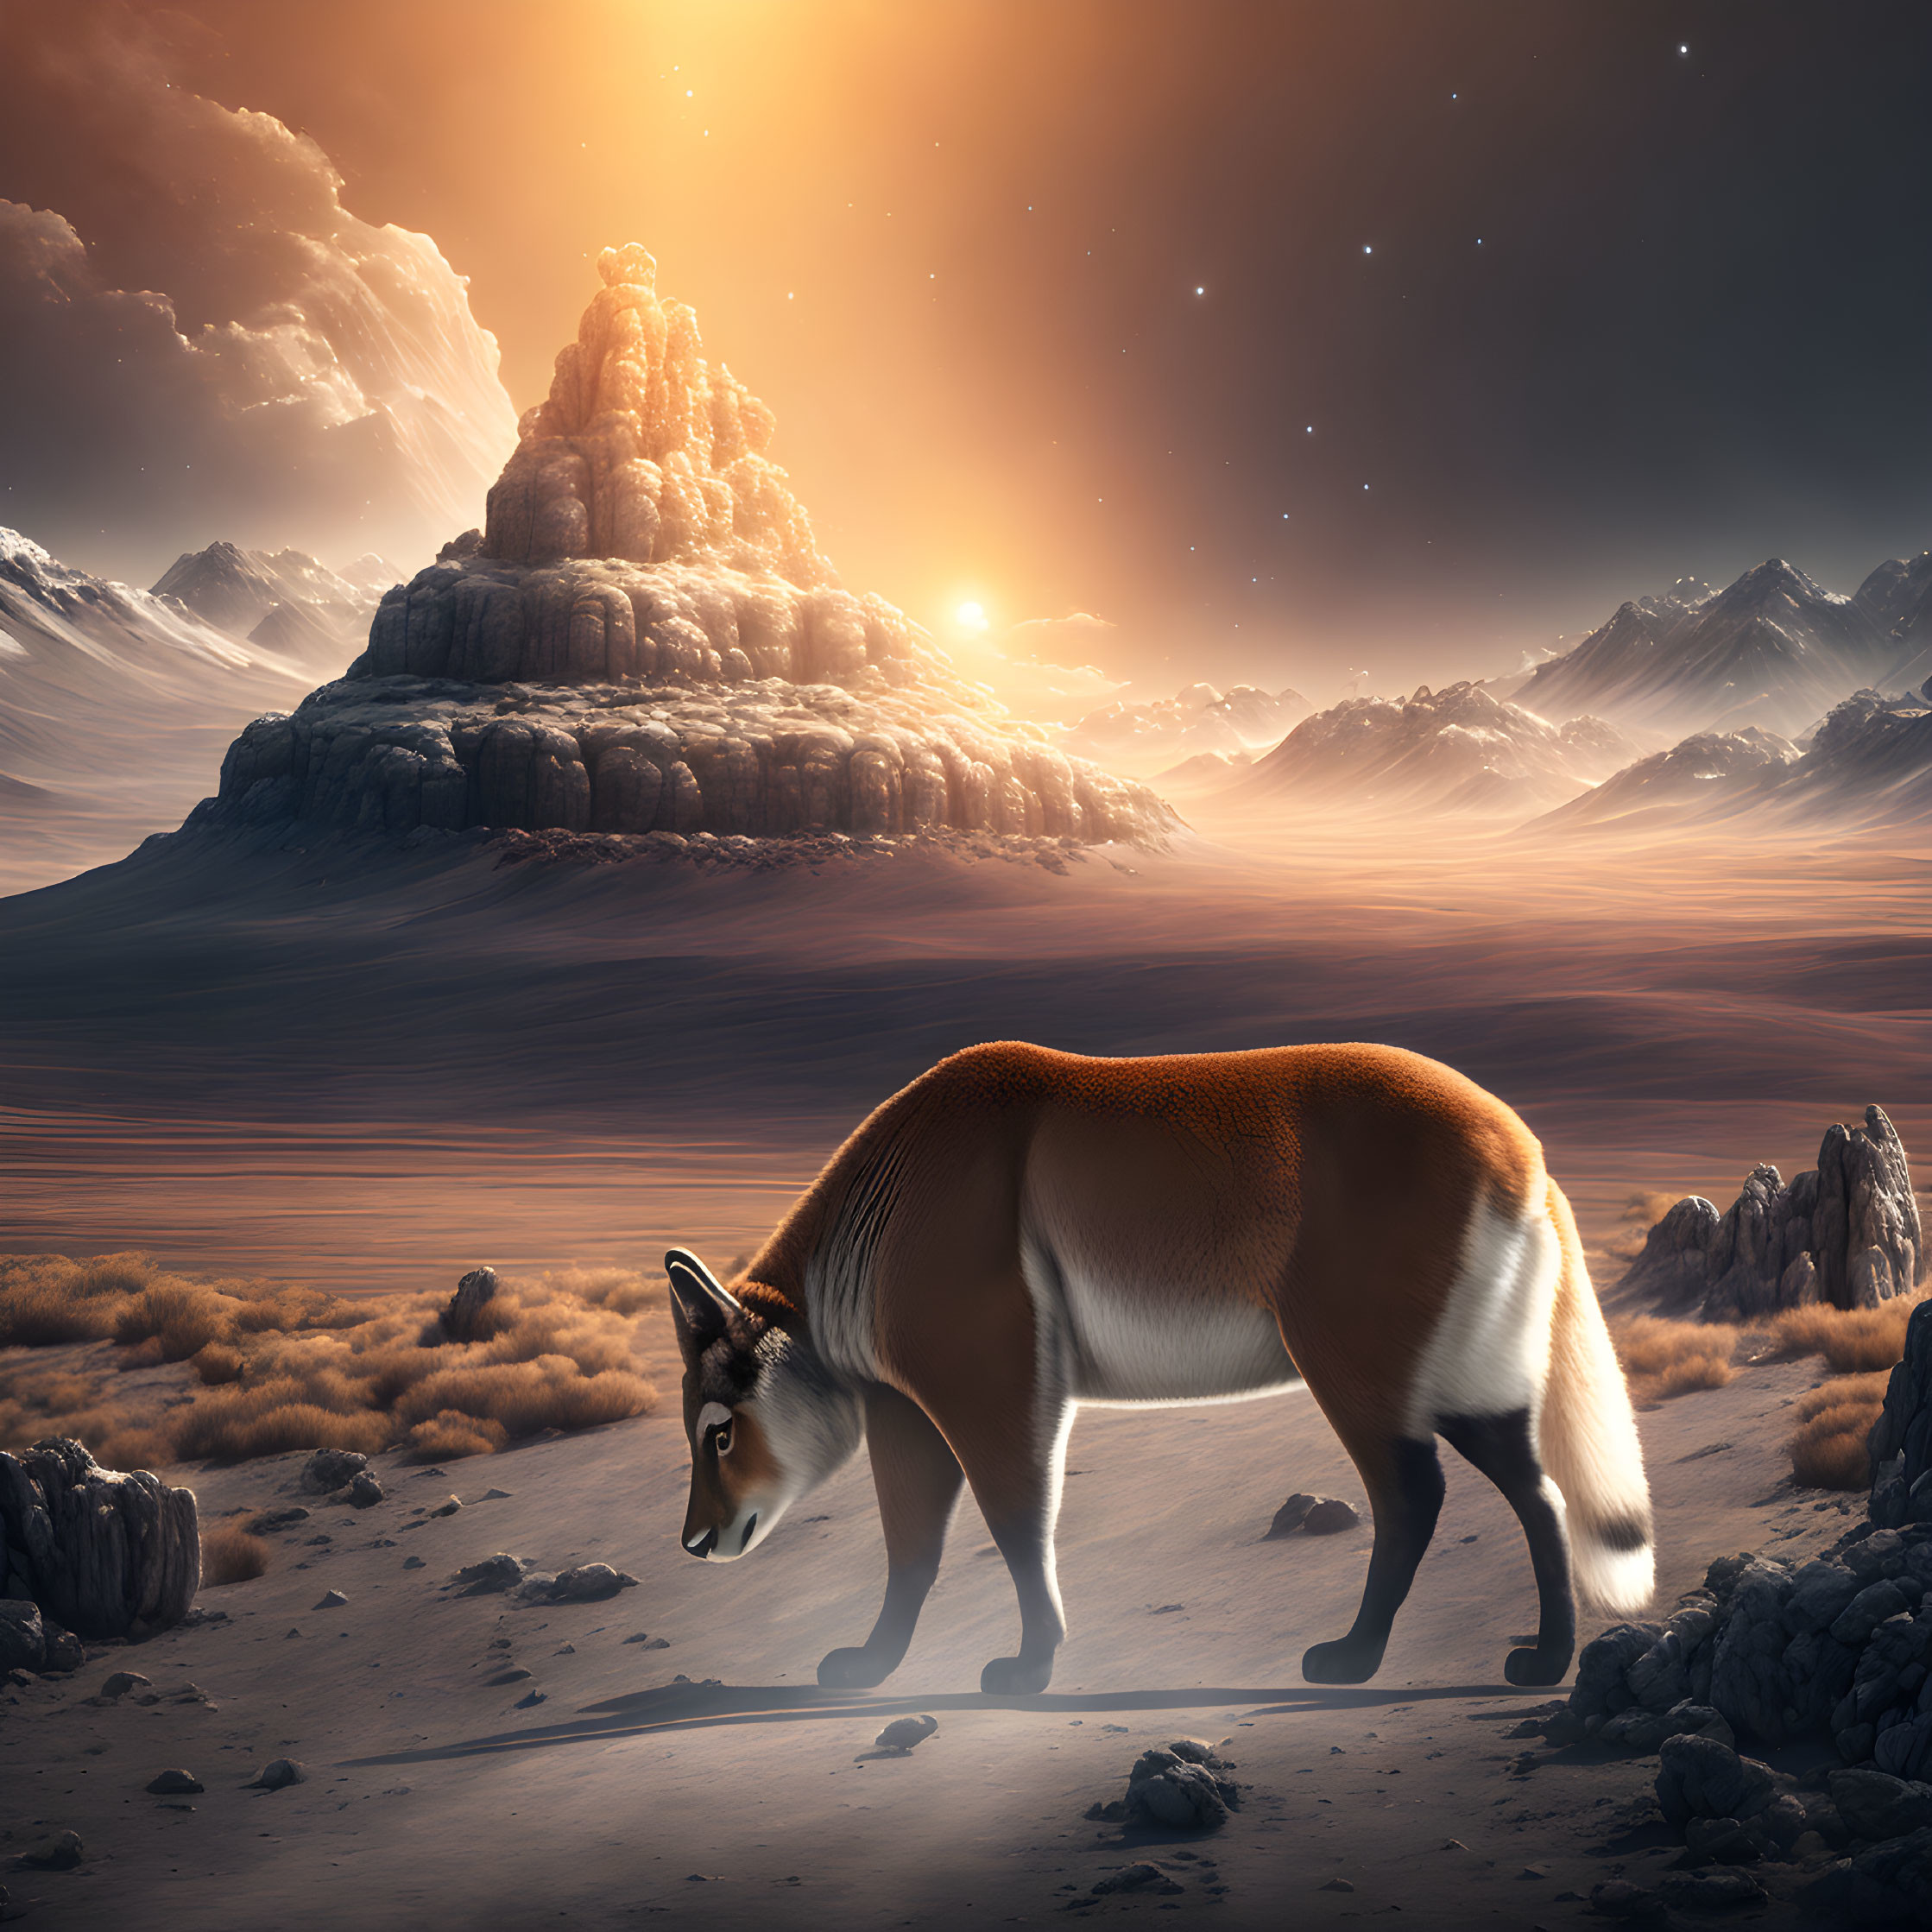 Majestic fox in surreal landscape with sunlit rock formations